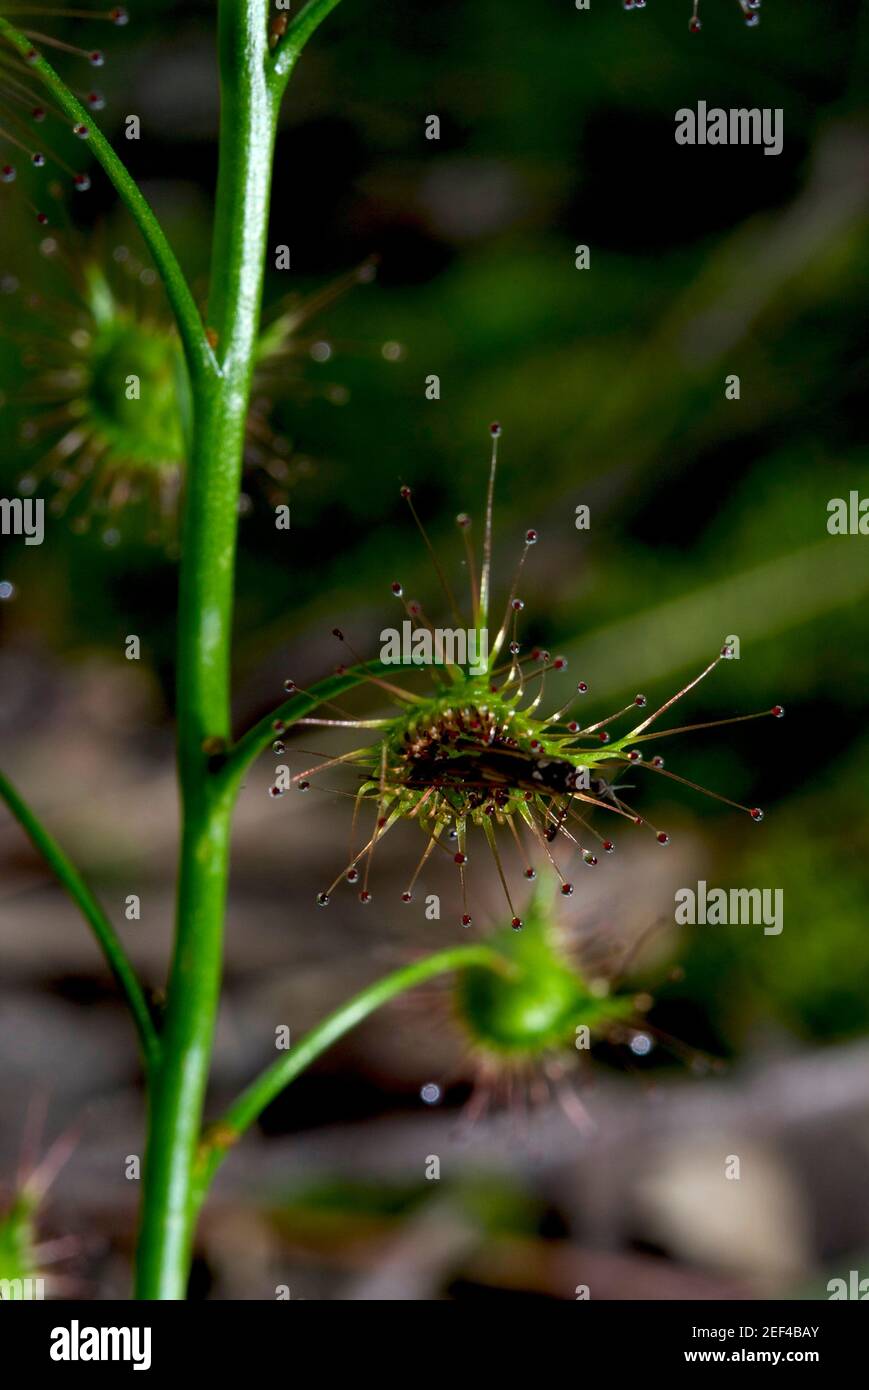 Suppertime for a Sundew - a flying insect has become stuck on the sticky leaf of this Ear Sundew (Drosera Auriculata) - also known as Tall Sundew. Stock Photo